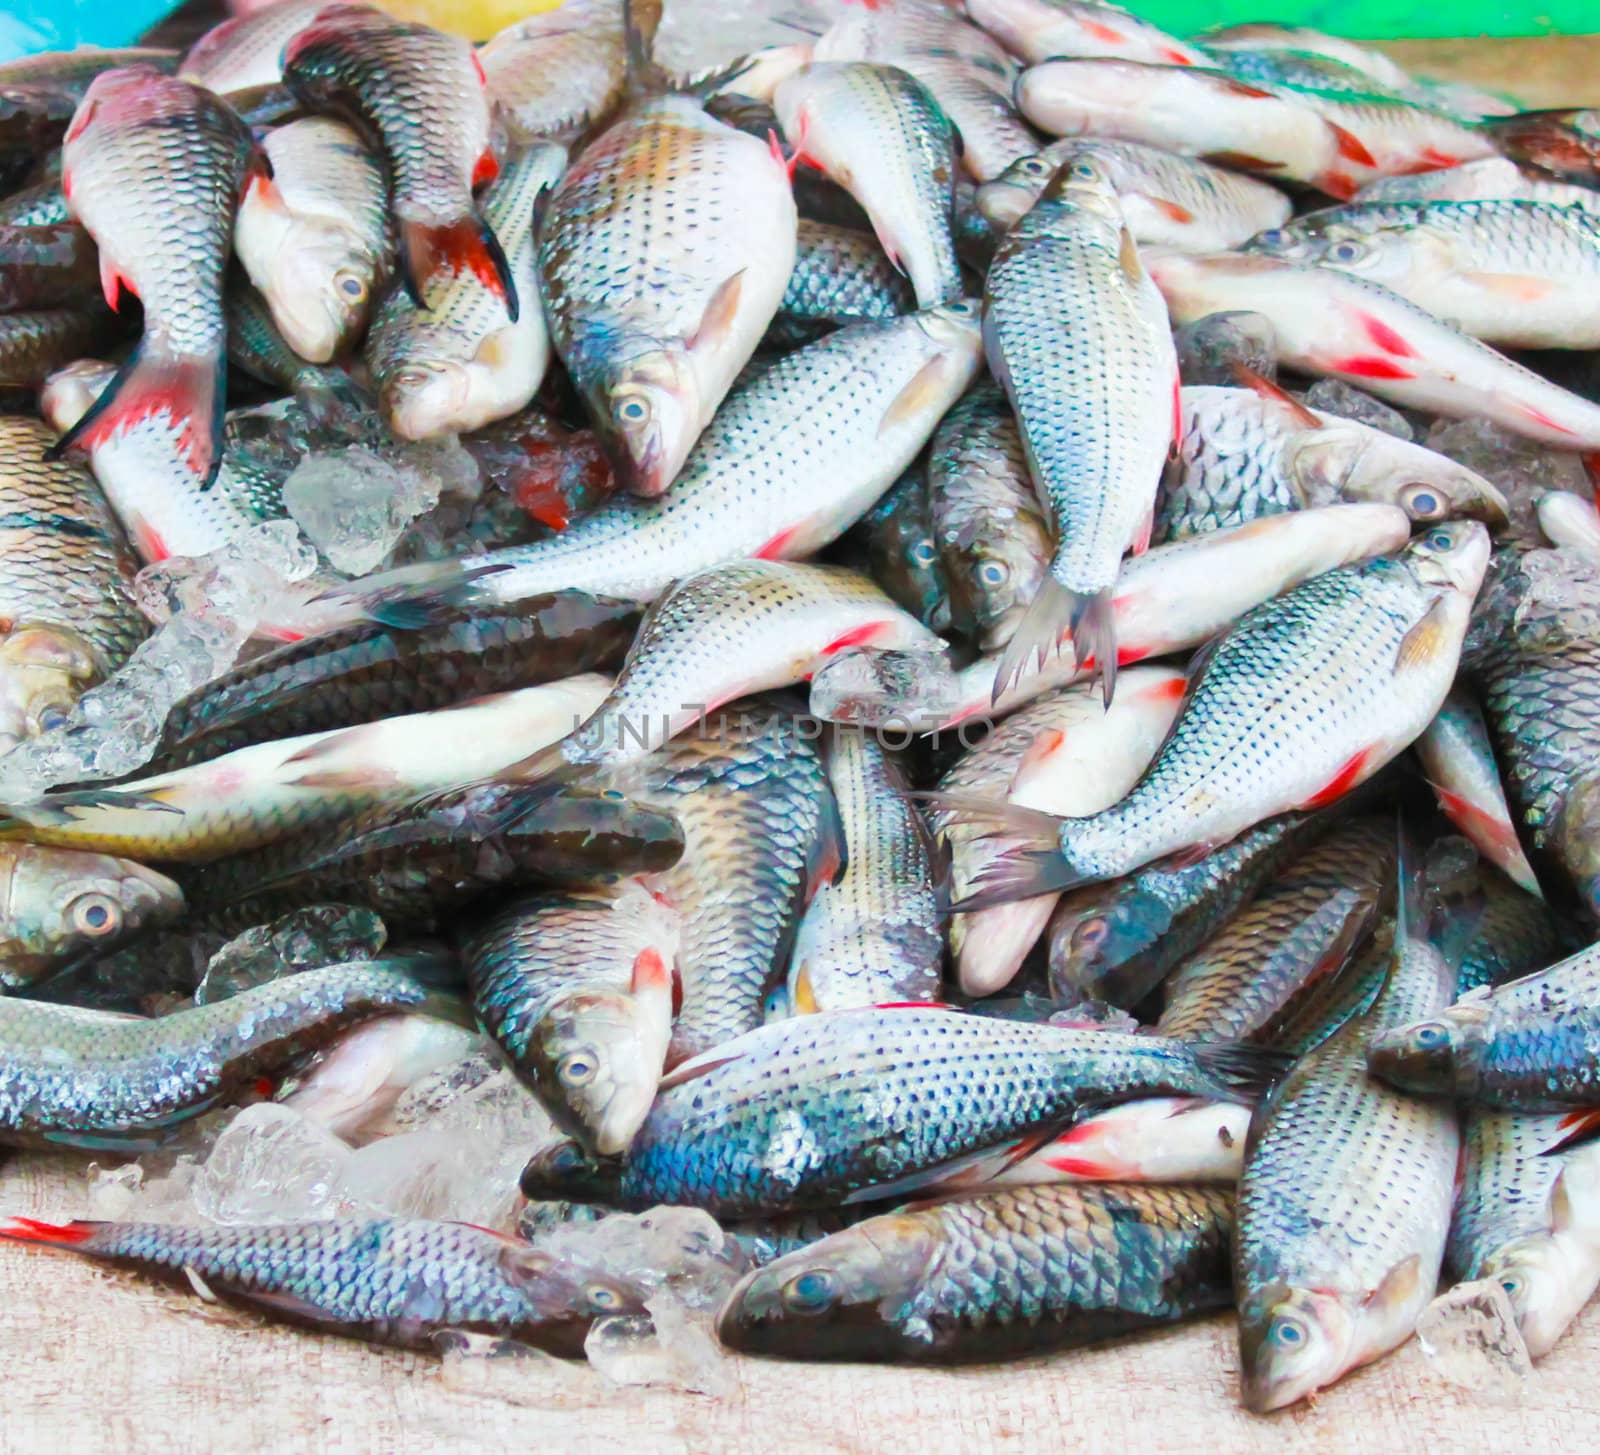 Died fish in morning market